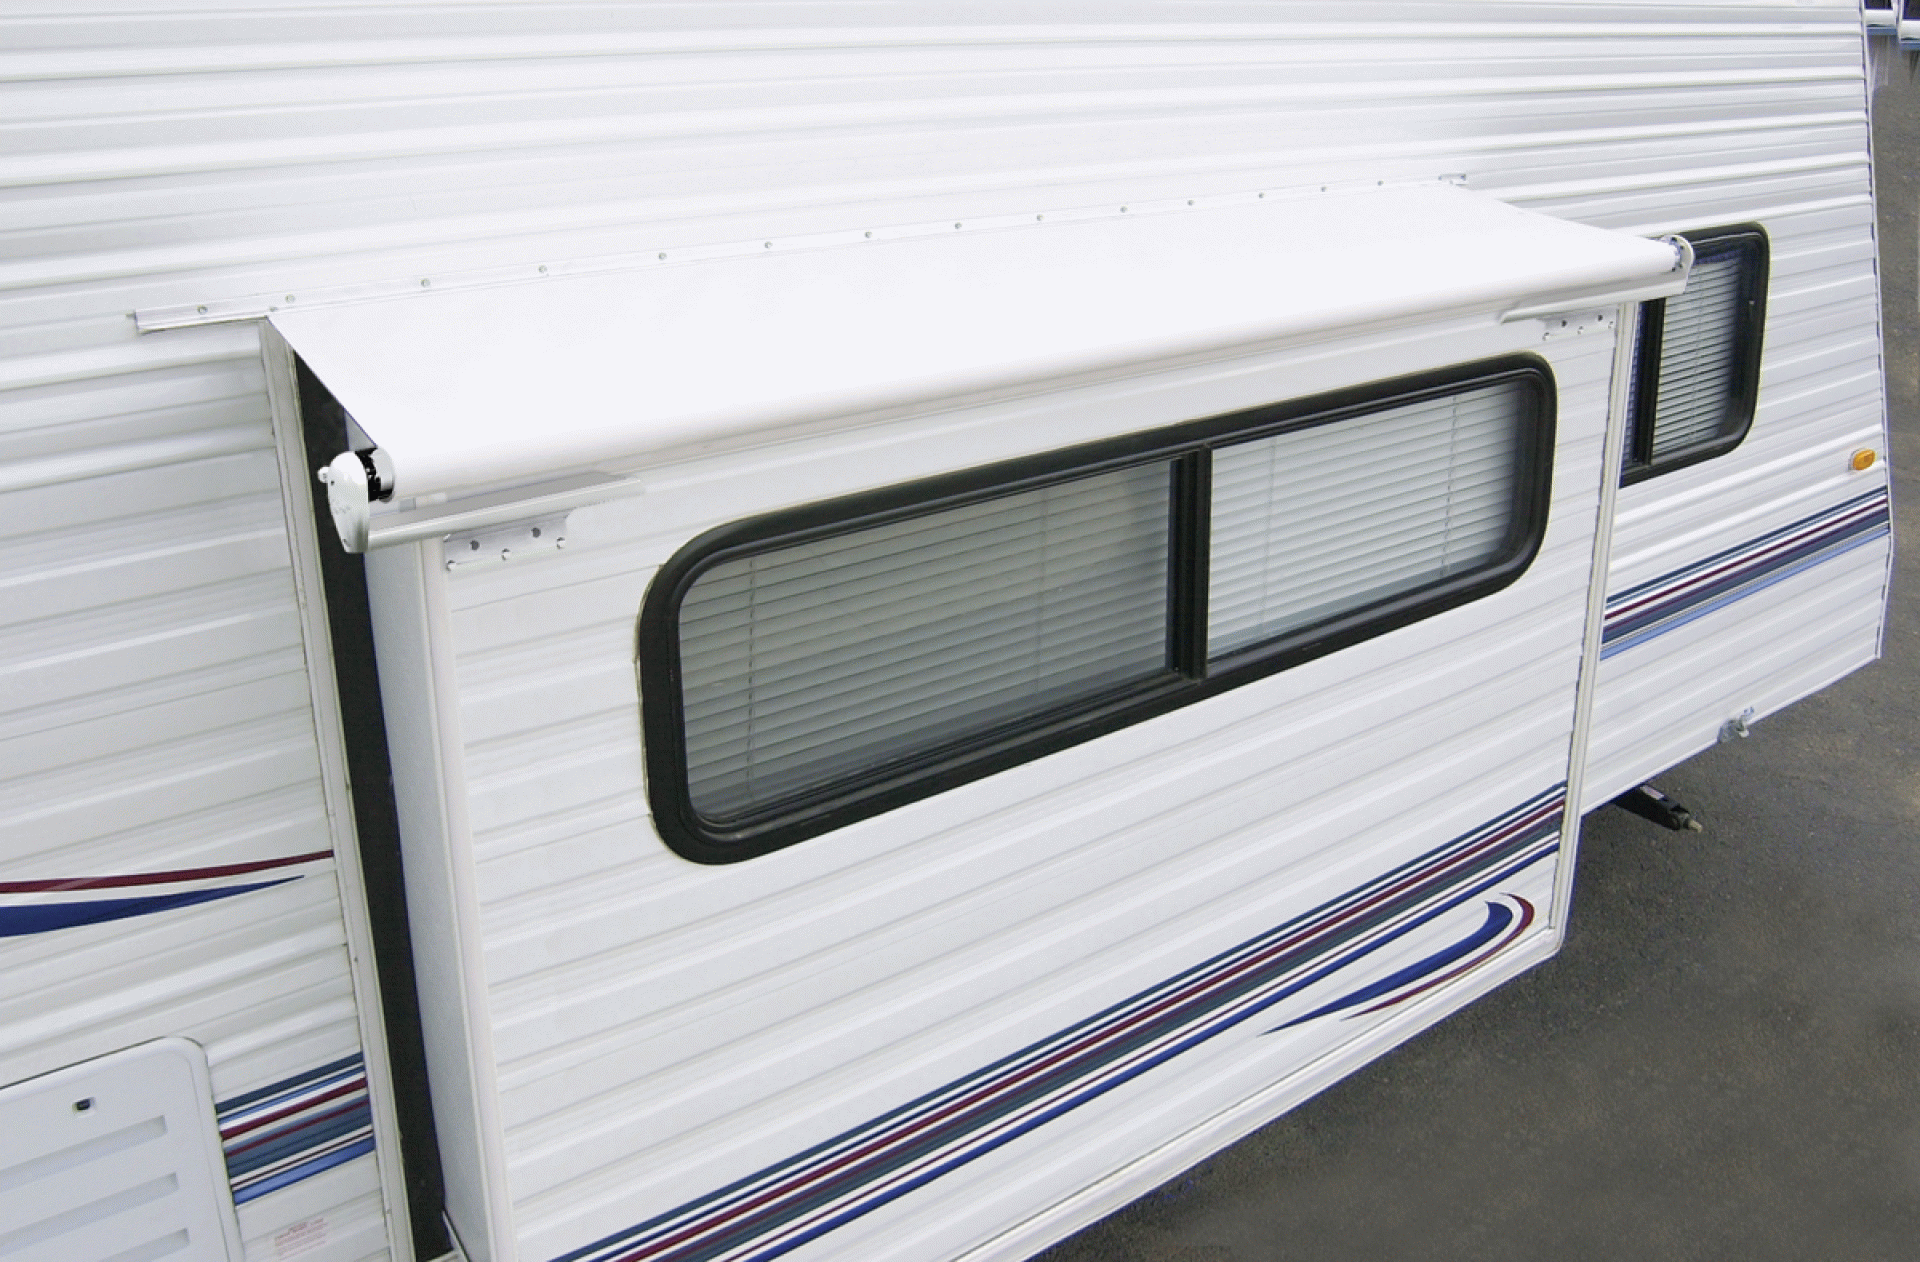 CAREFREE OF COLORADO | LH1056242 | Slideout Cover Awning 98" - 105.9" Roof Range Solid Black Vinyl